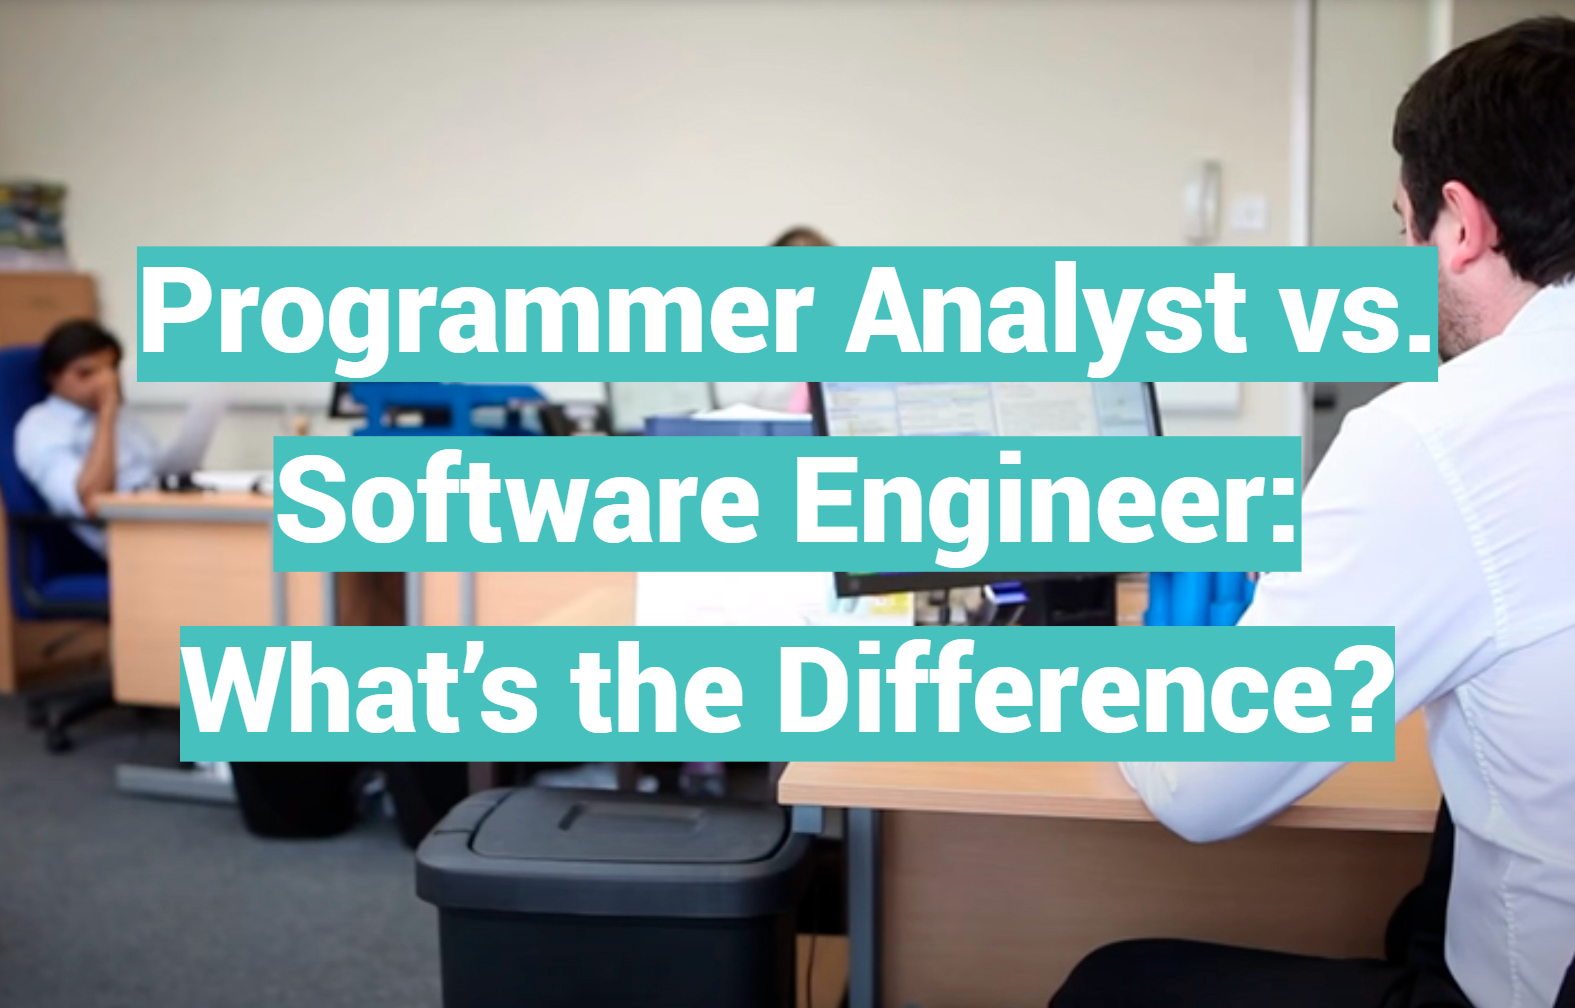 Programmer Analyst vs. Software Engineer: What’s the Difference?